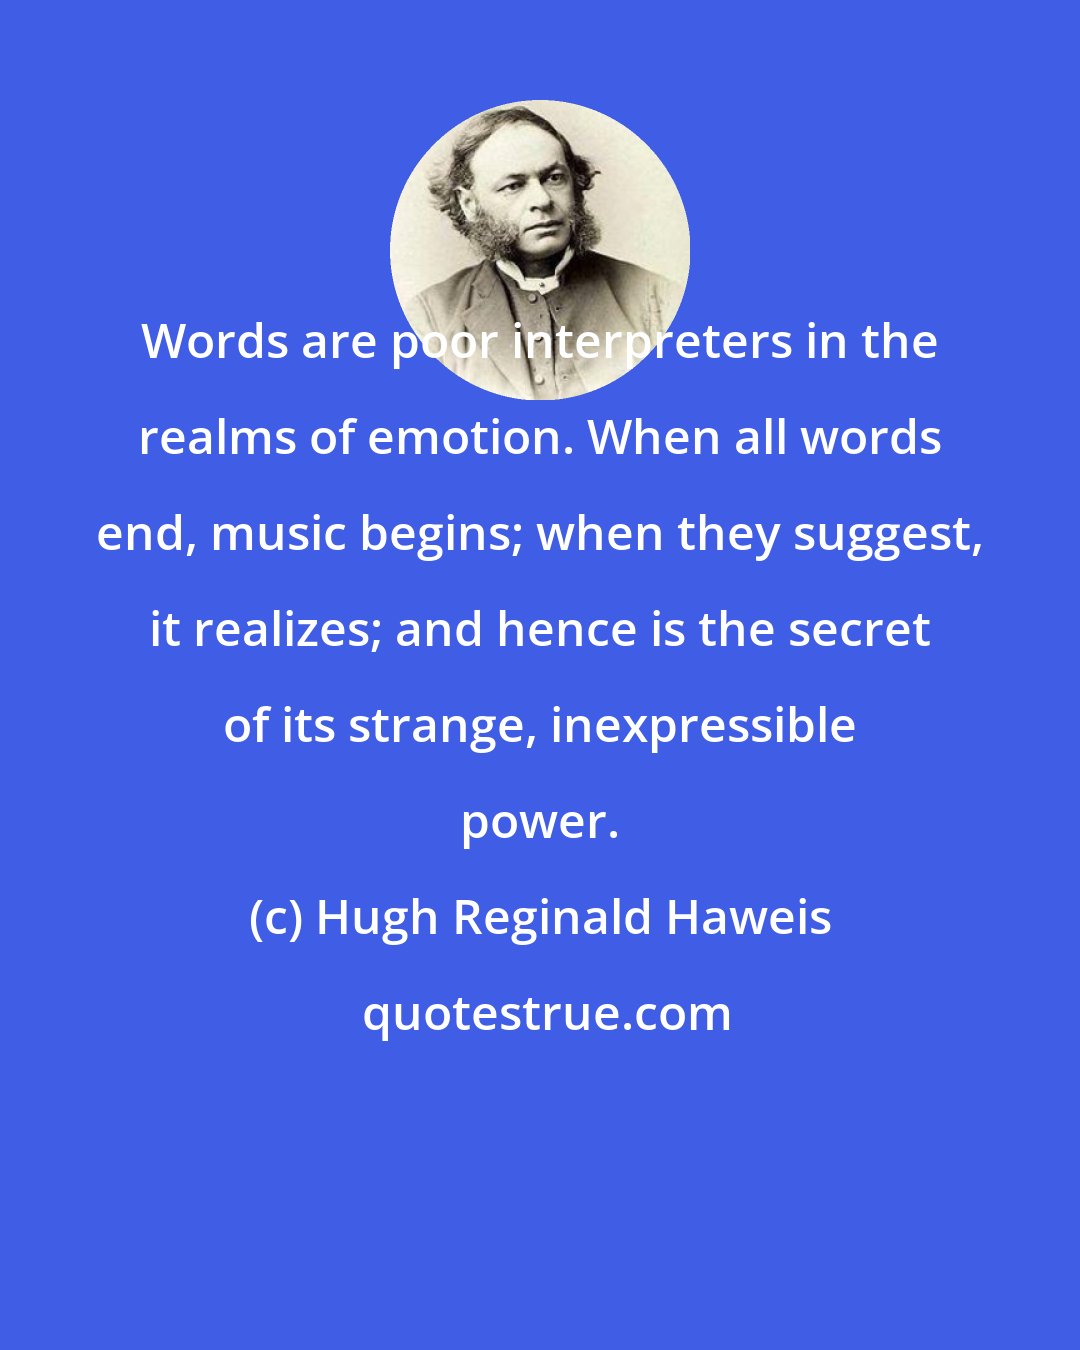 Hugh Reginald Haweis: Words are poor interpreters in the realms of emotion. When all words end, music begins; when they suggest, it realizes; and hence is the secret of its strange, inexpressible power.